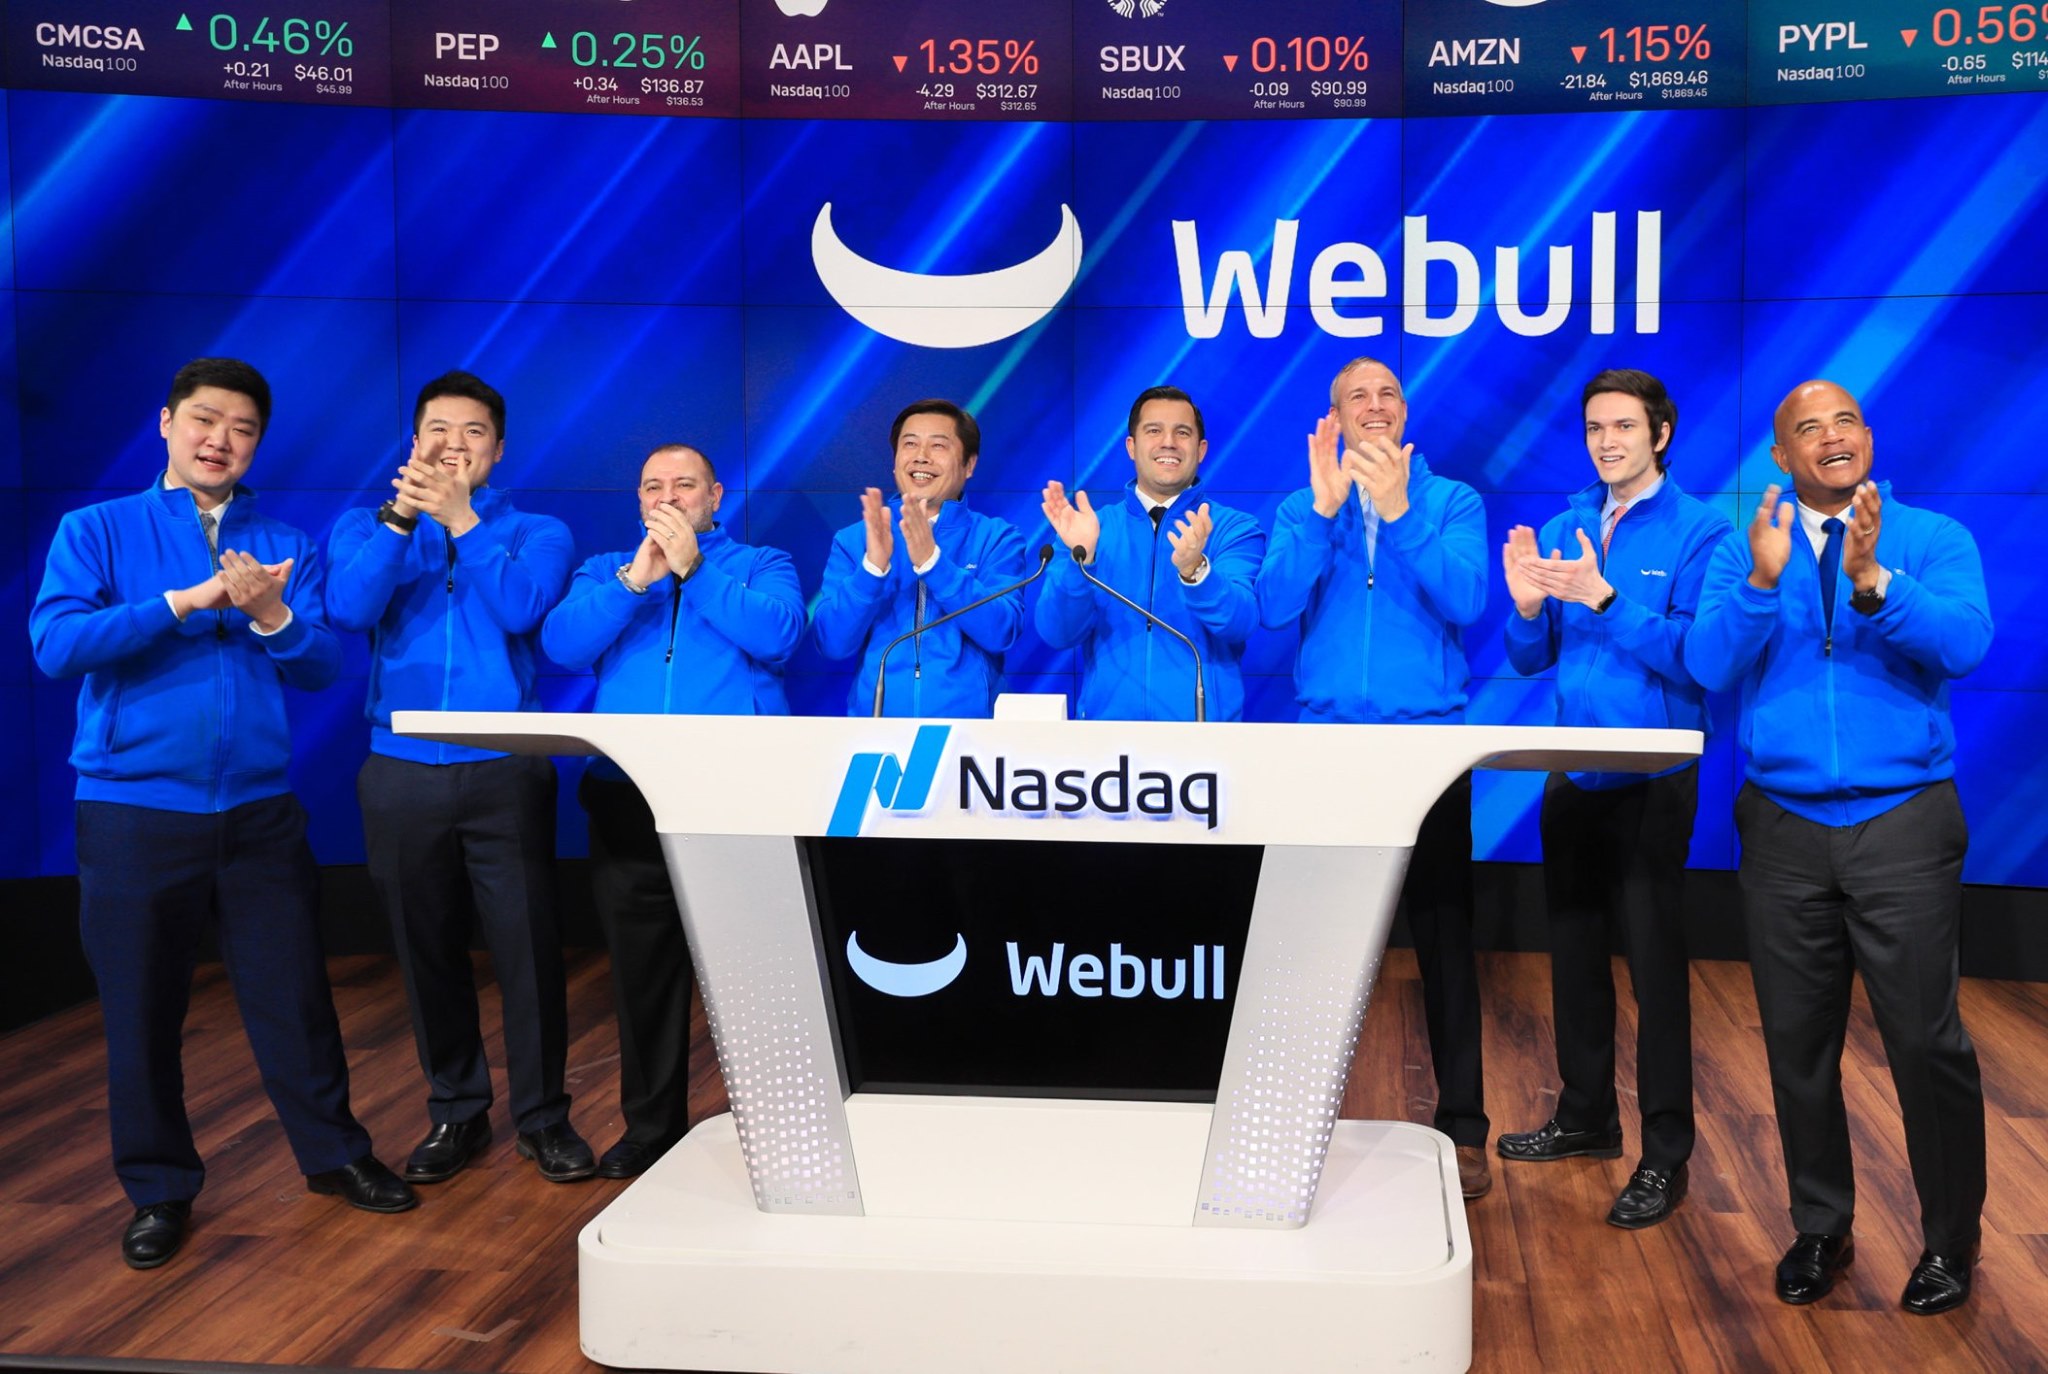 GameStop turns little-known China firm Webull into No. 2 app in US